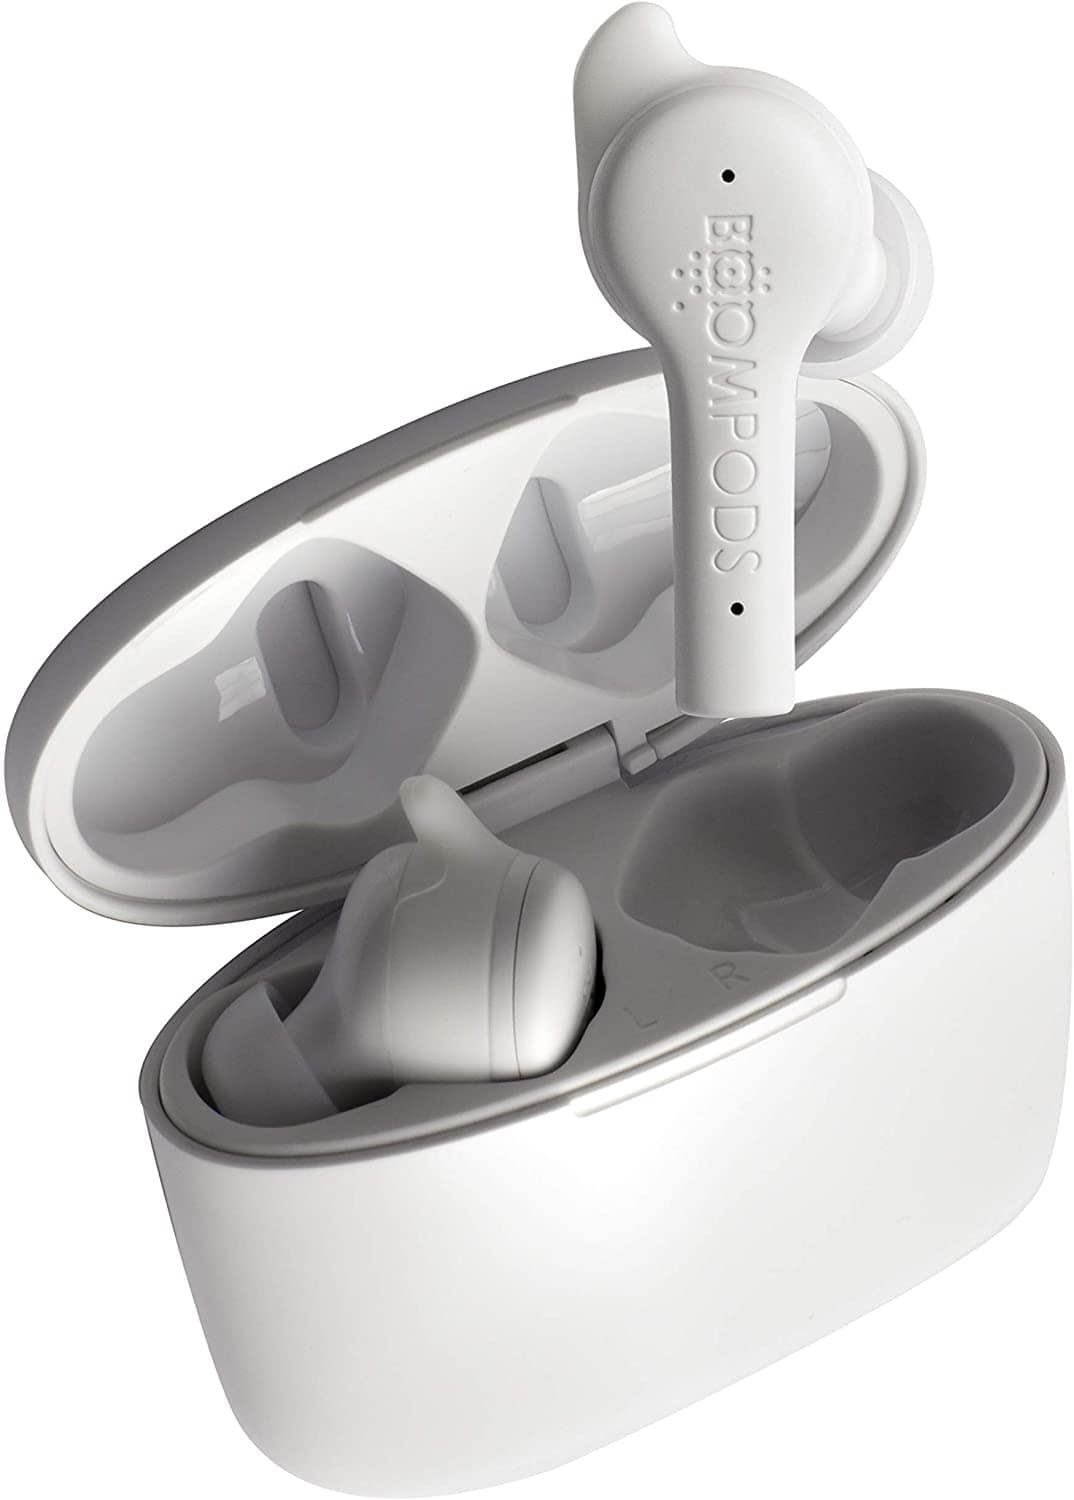 BOOMPODS BASSLINE ANC TRUE WIRELESS – ACTIVE NOISE CANCELLING BLUETOOTH IN-EAR HEADPHONES (WHITE) [ACCESSORIES]